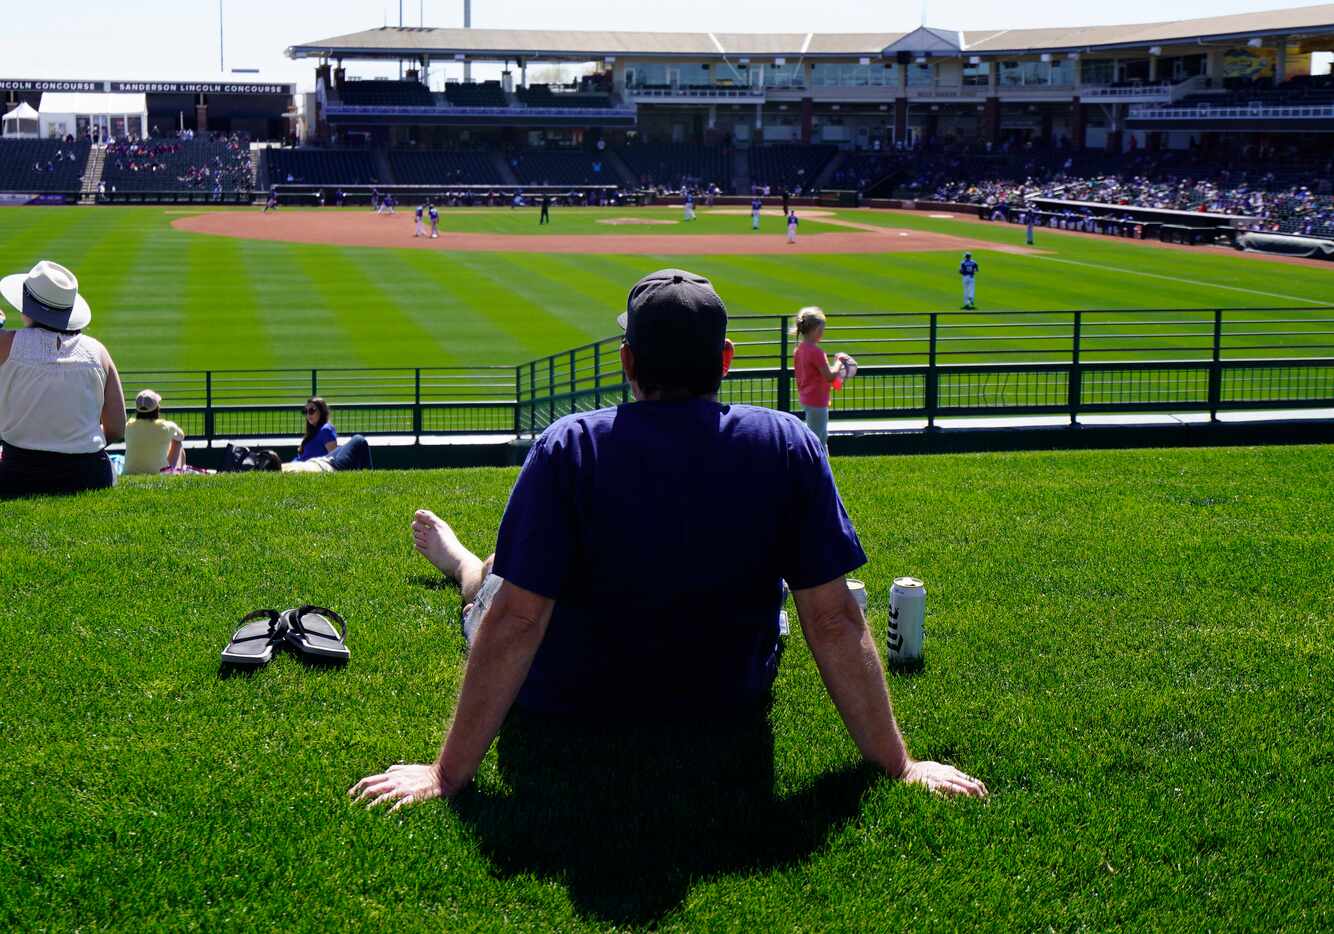 Baseball and their fans are back watching a minor league Spring Training game between the...